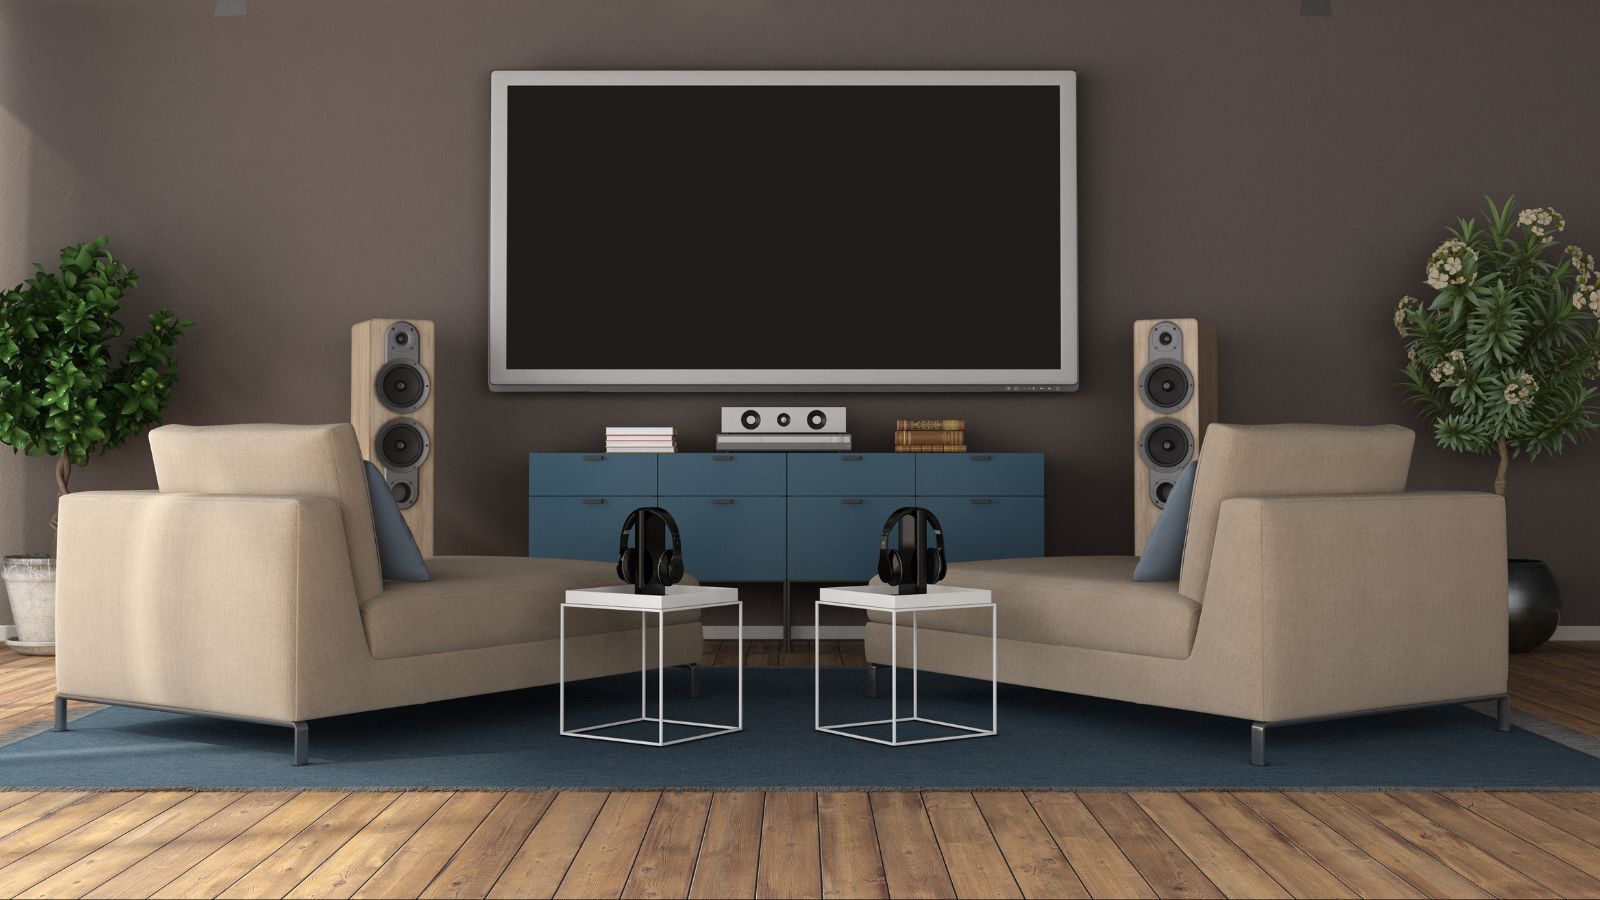 Subwoofer in Apartment - Five Neighborly Strategies for Peaceful Living